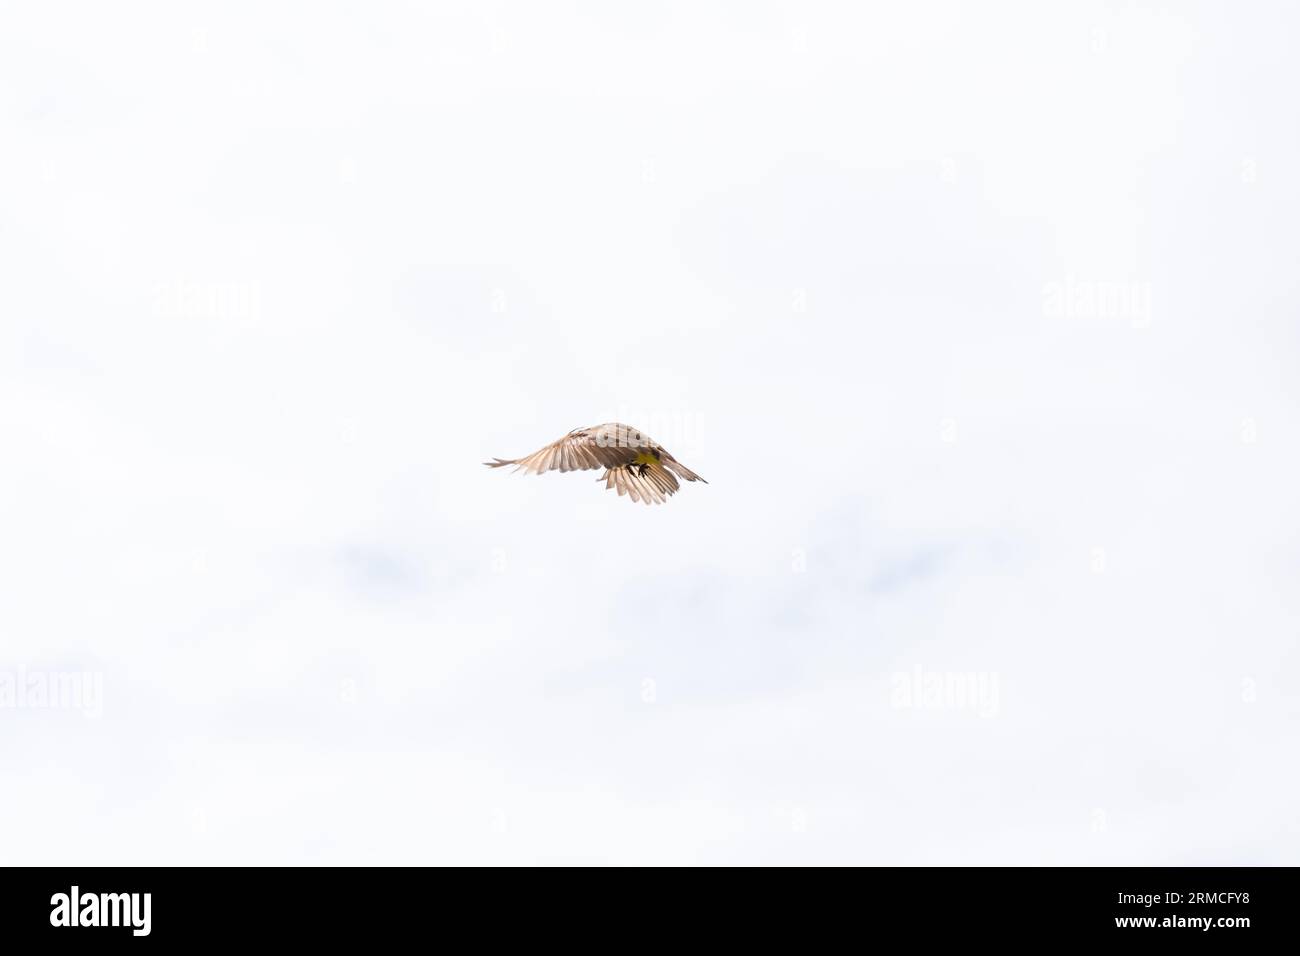 A yellow bird in full flight with open wings. Feeling of freedom. Wild life Stock Photo